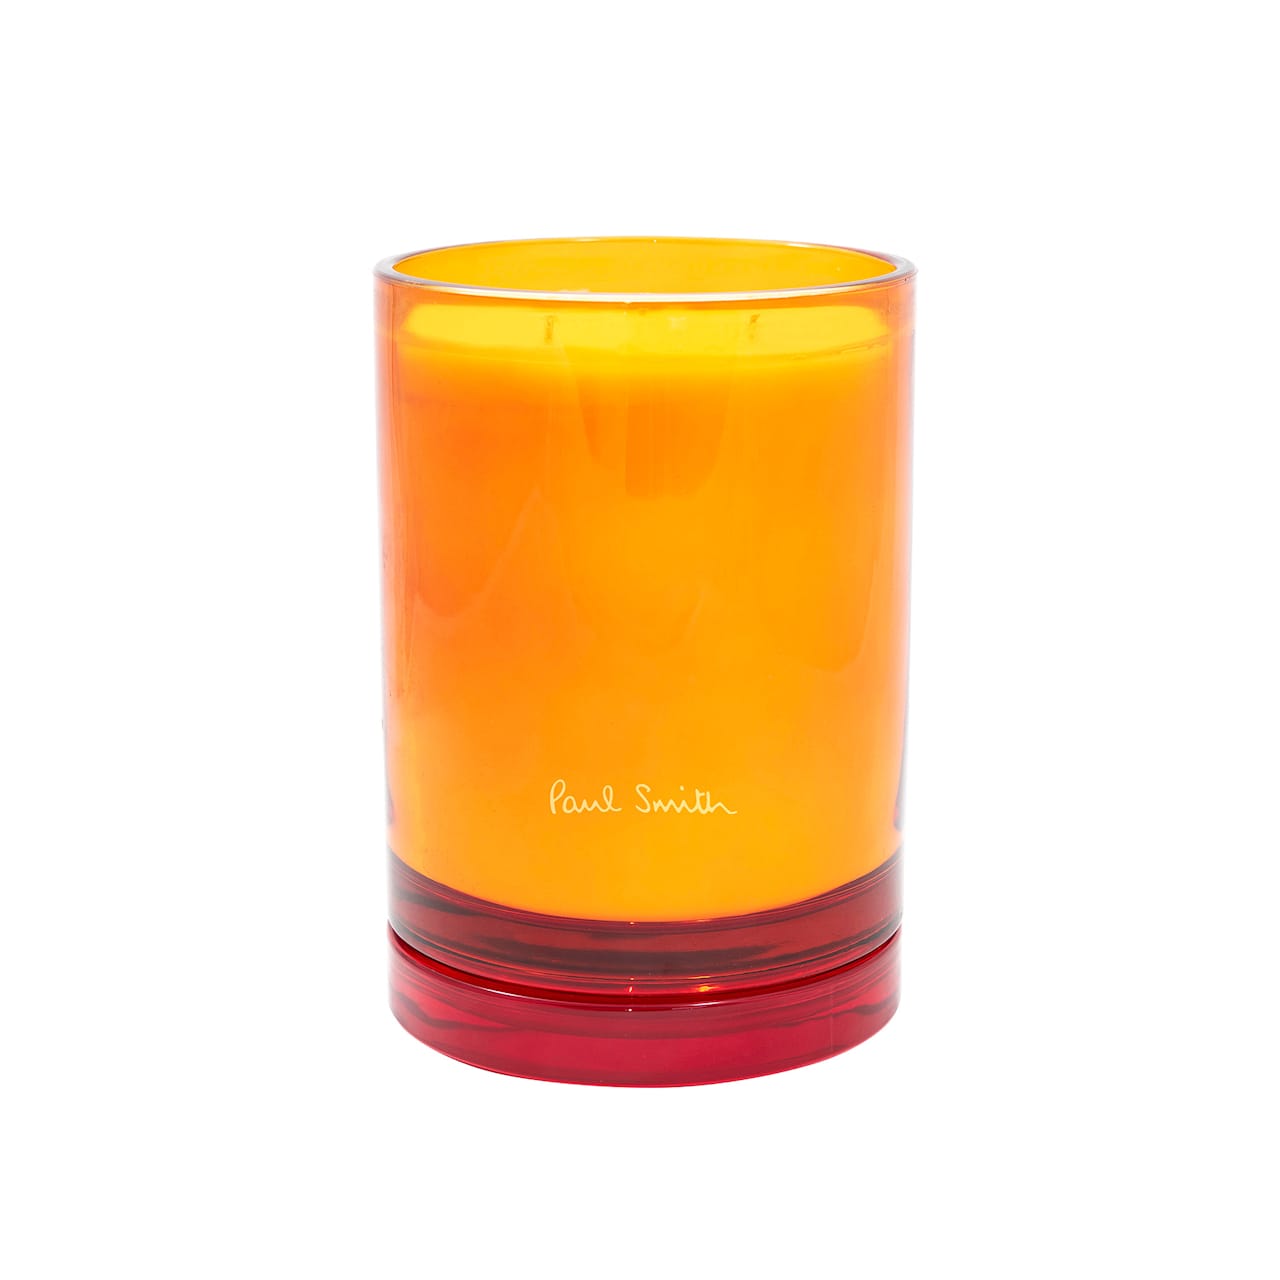 Paul Smith Bookworm Candle